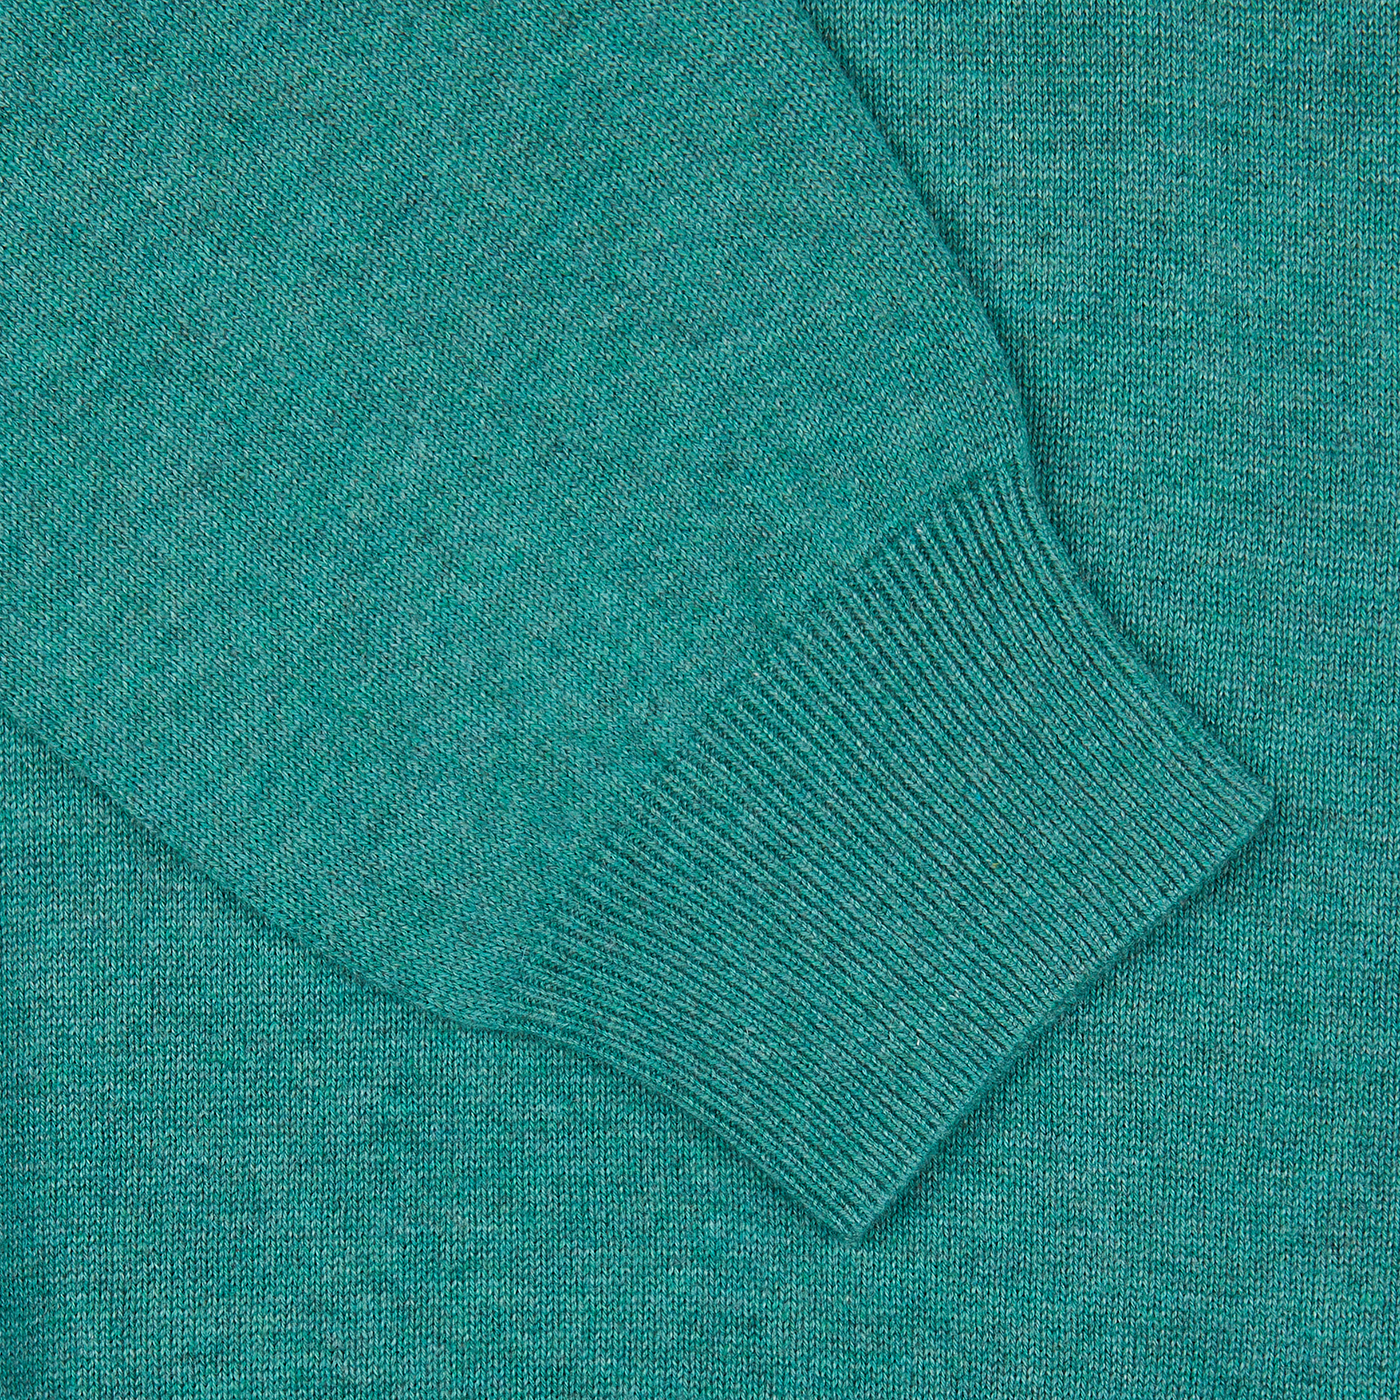 A close up of an Alan Paine Moorland Green Luxury Cotton 1/4 Zip Sweater.